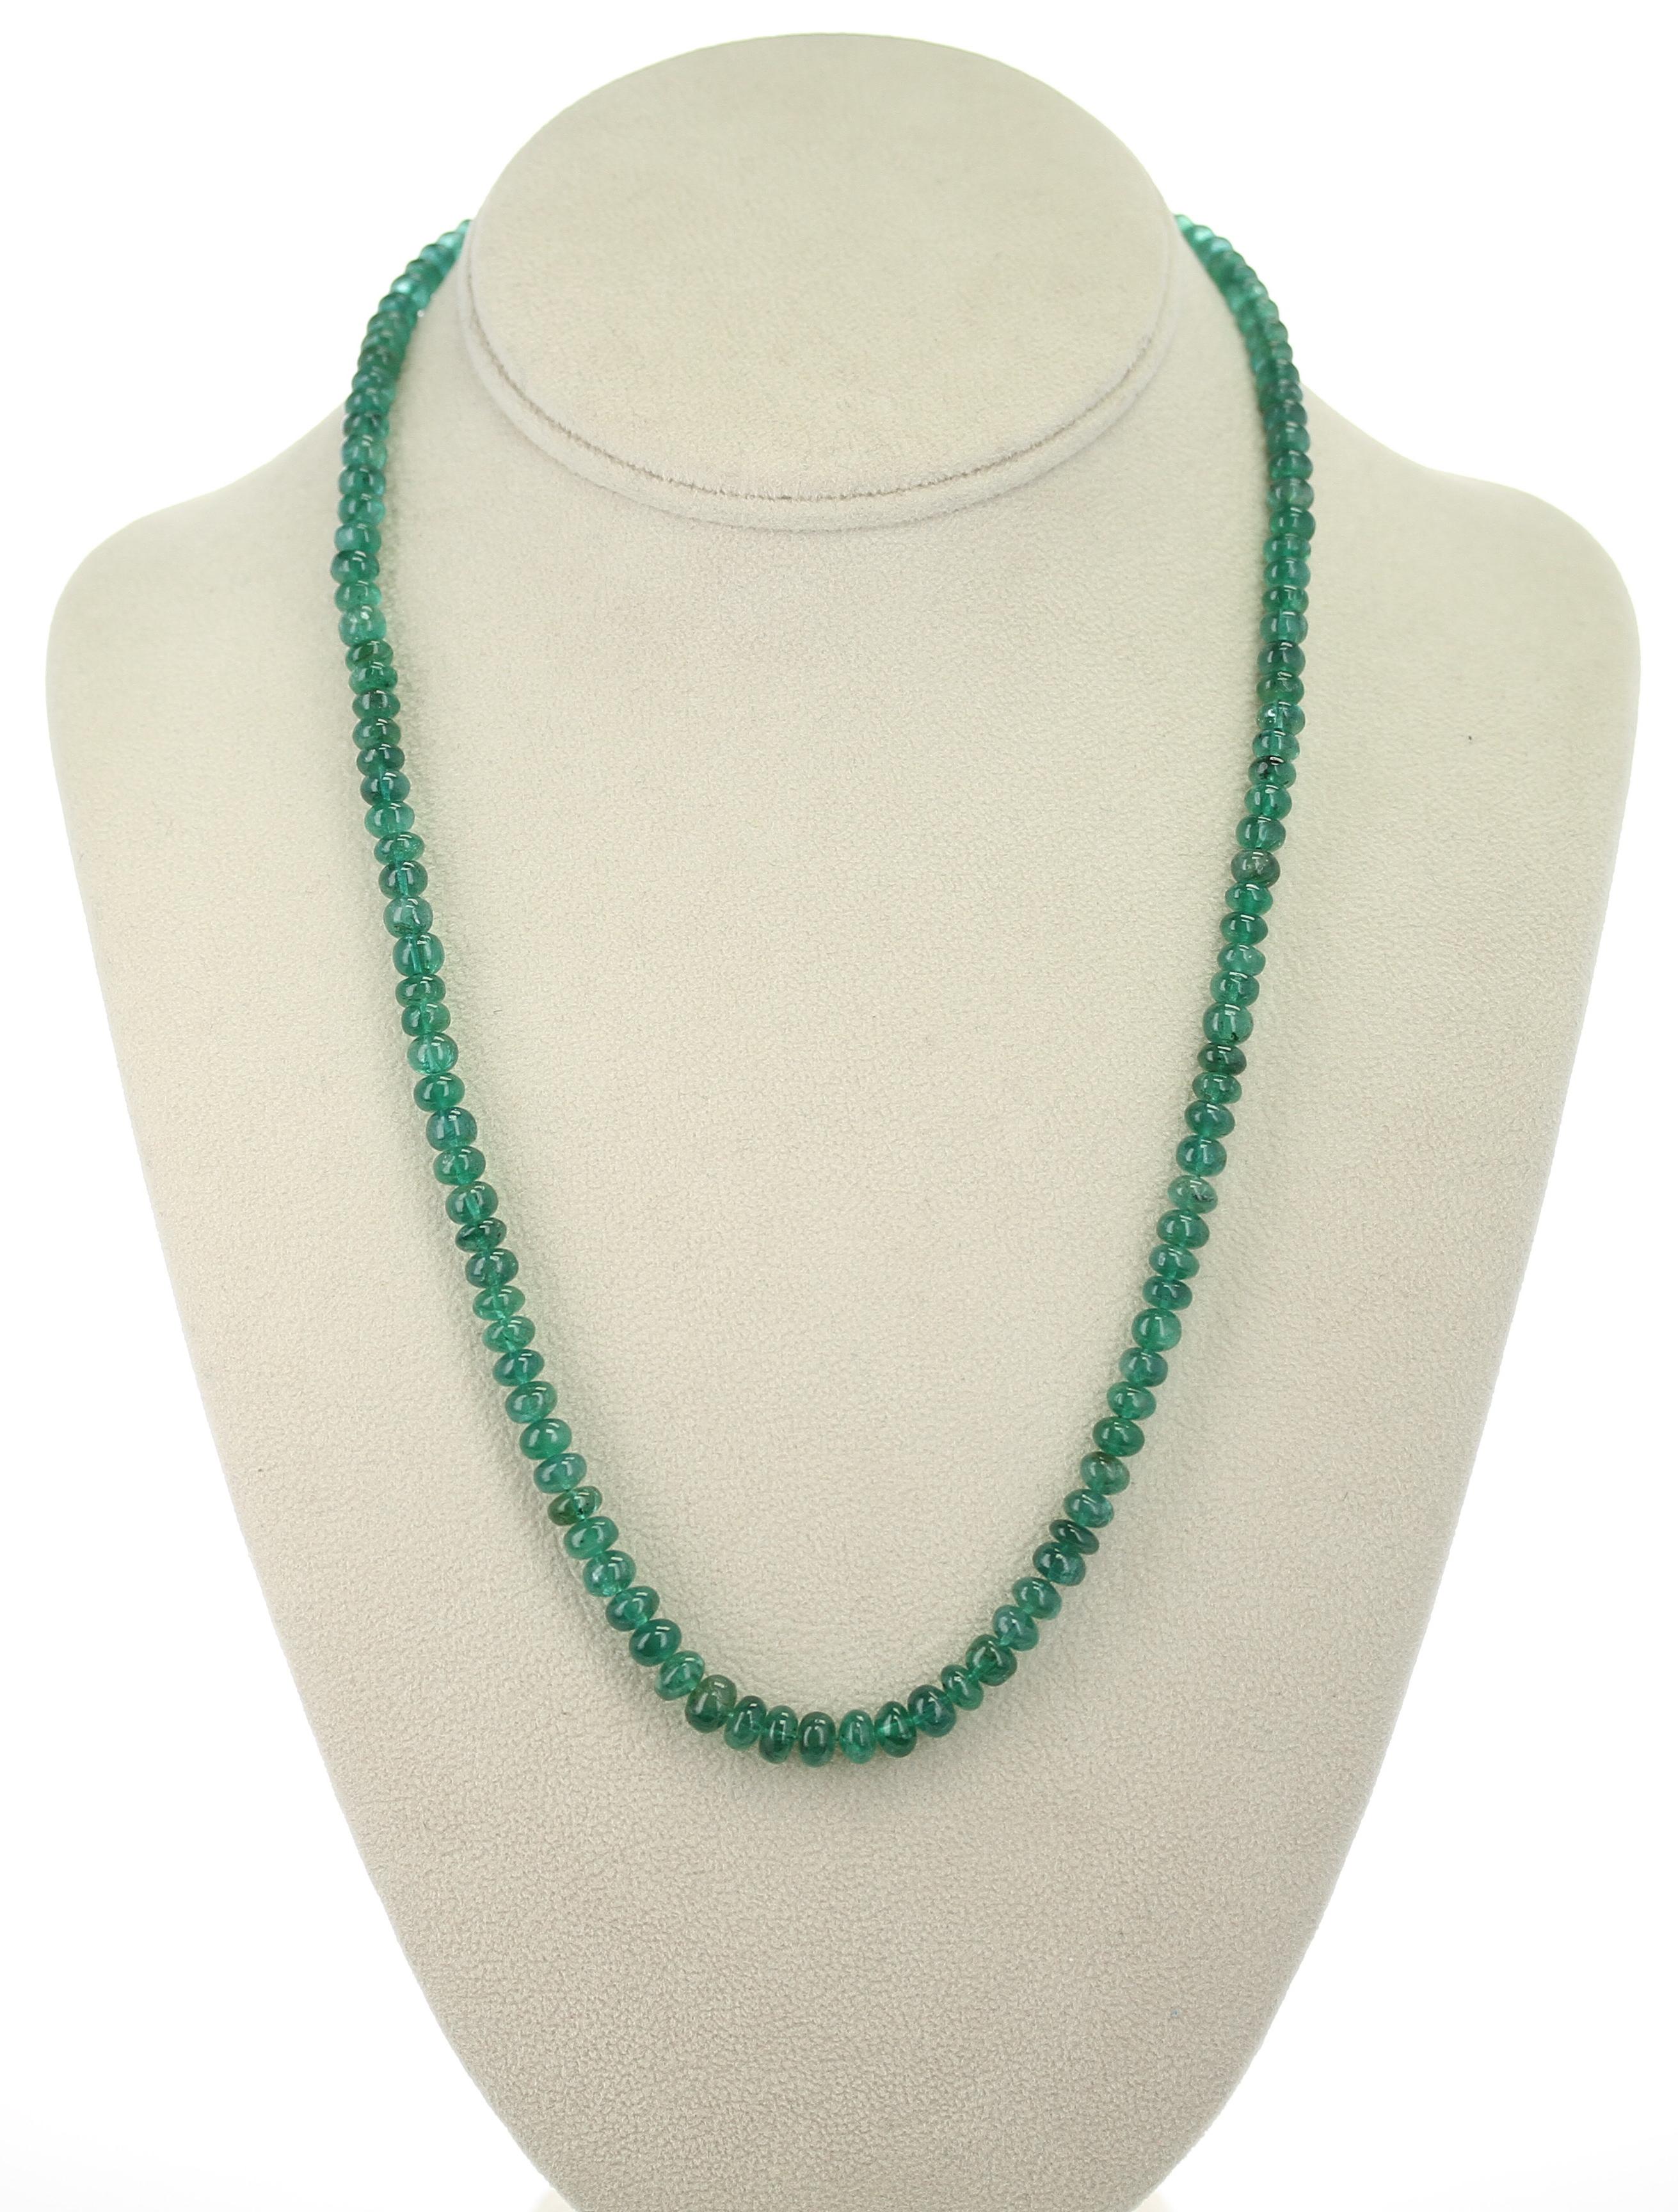 A fine strand of Genuine and Natural Brazilian Emerald Plain Beads Necklace, weighing 131 carats, measuring 20.50 Inches, the beads ranging from 4.50MM to 6.50 MM, with an 18K Yellow Smooth Gold Clasp. We can also customize the necklace according to